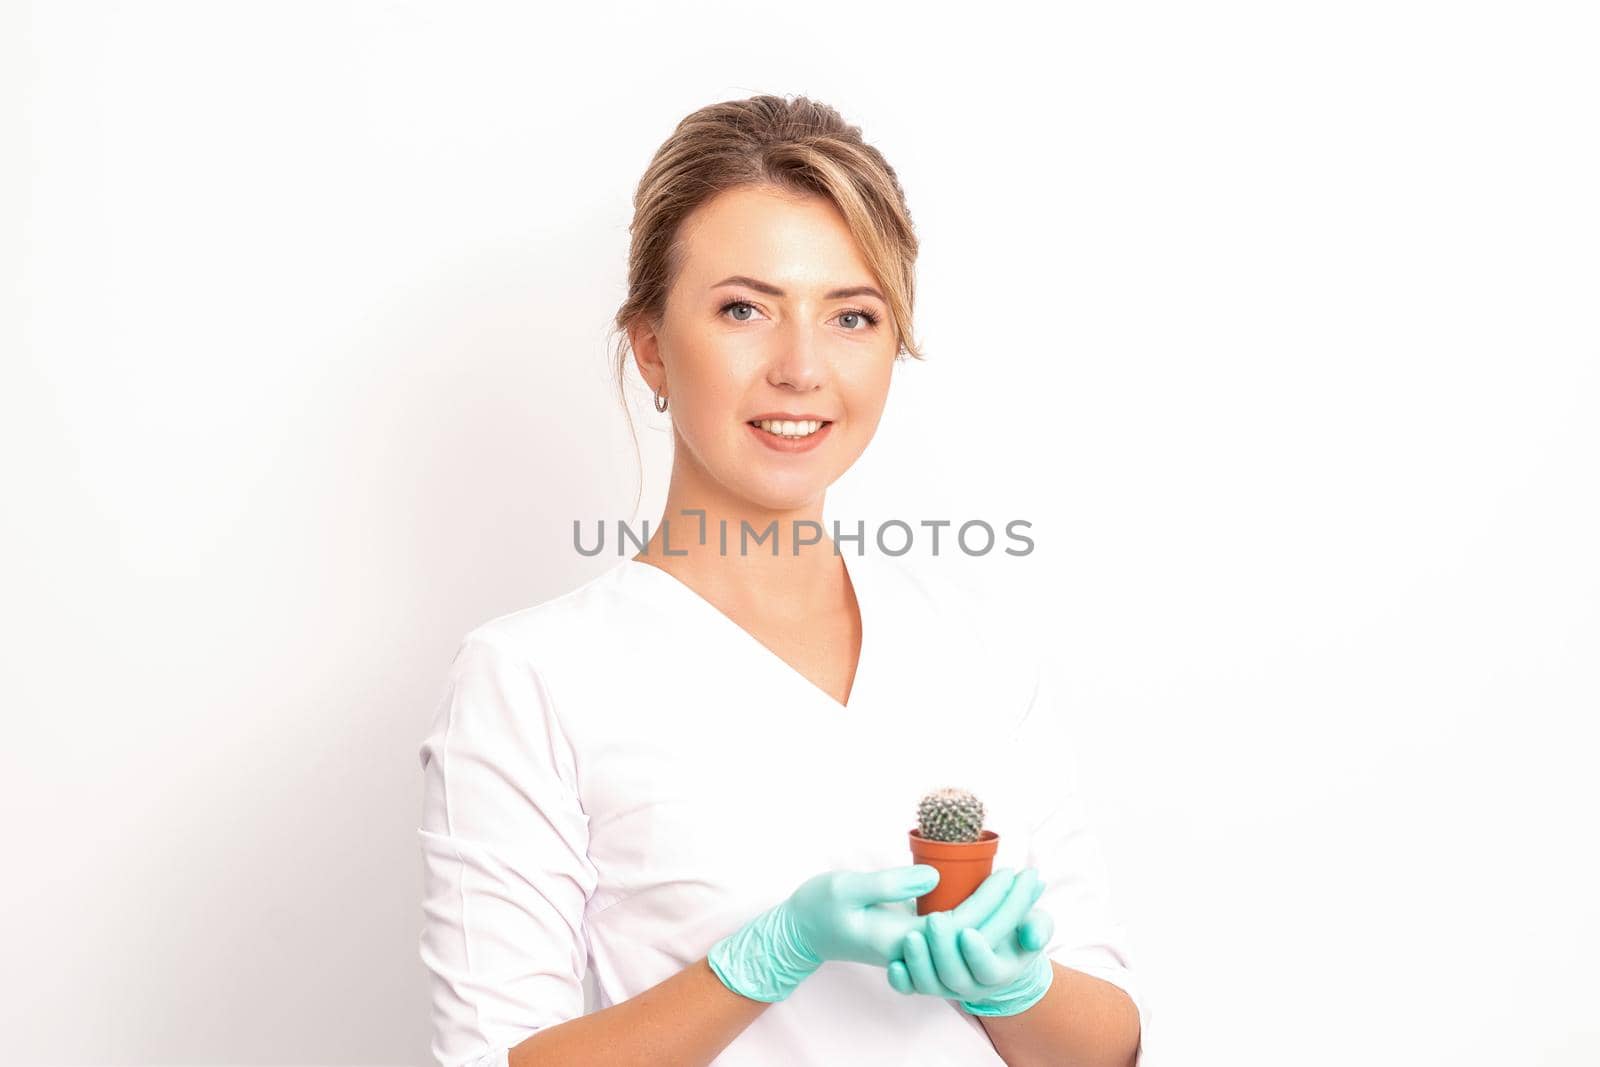 A portrait of a smiling female holds little green cactus in her hands. Hair removal concept